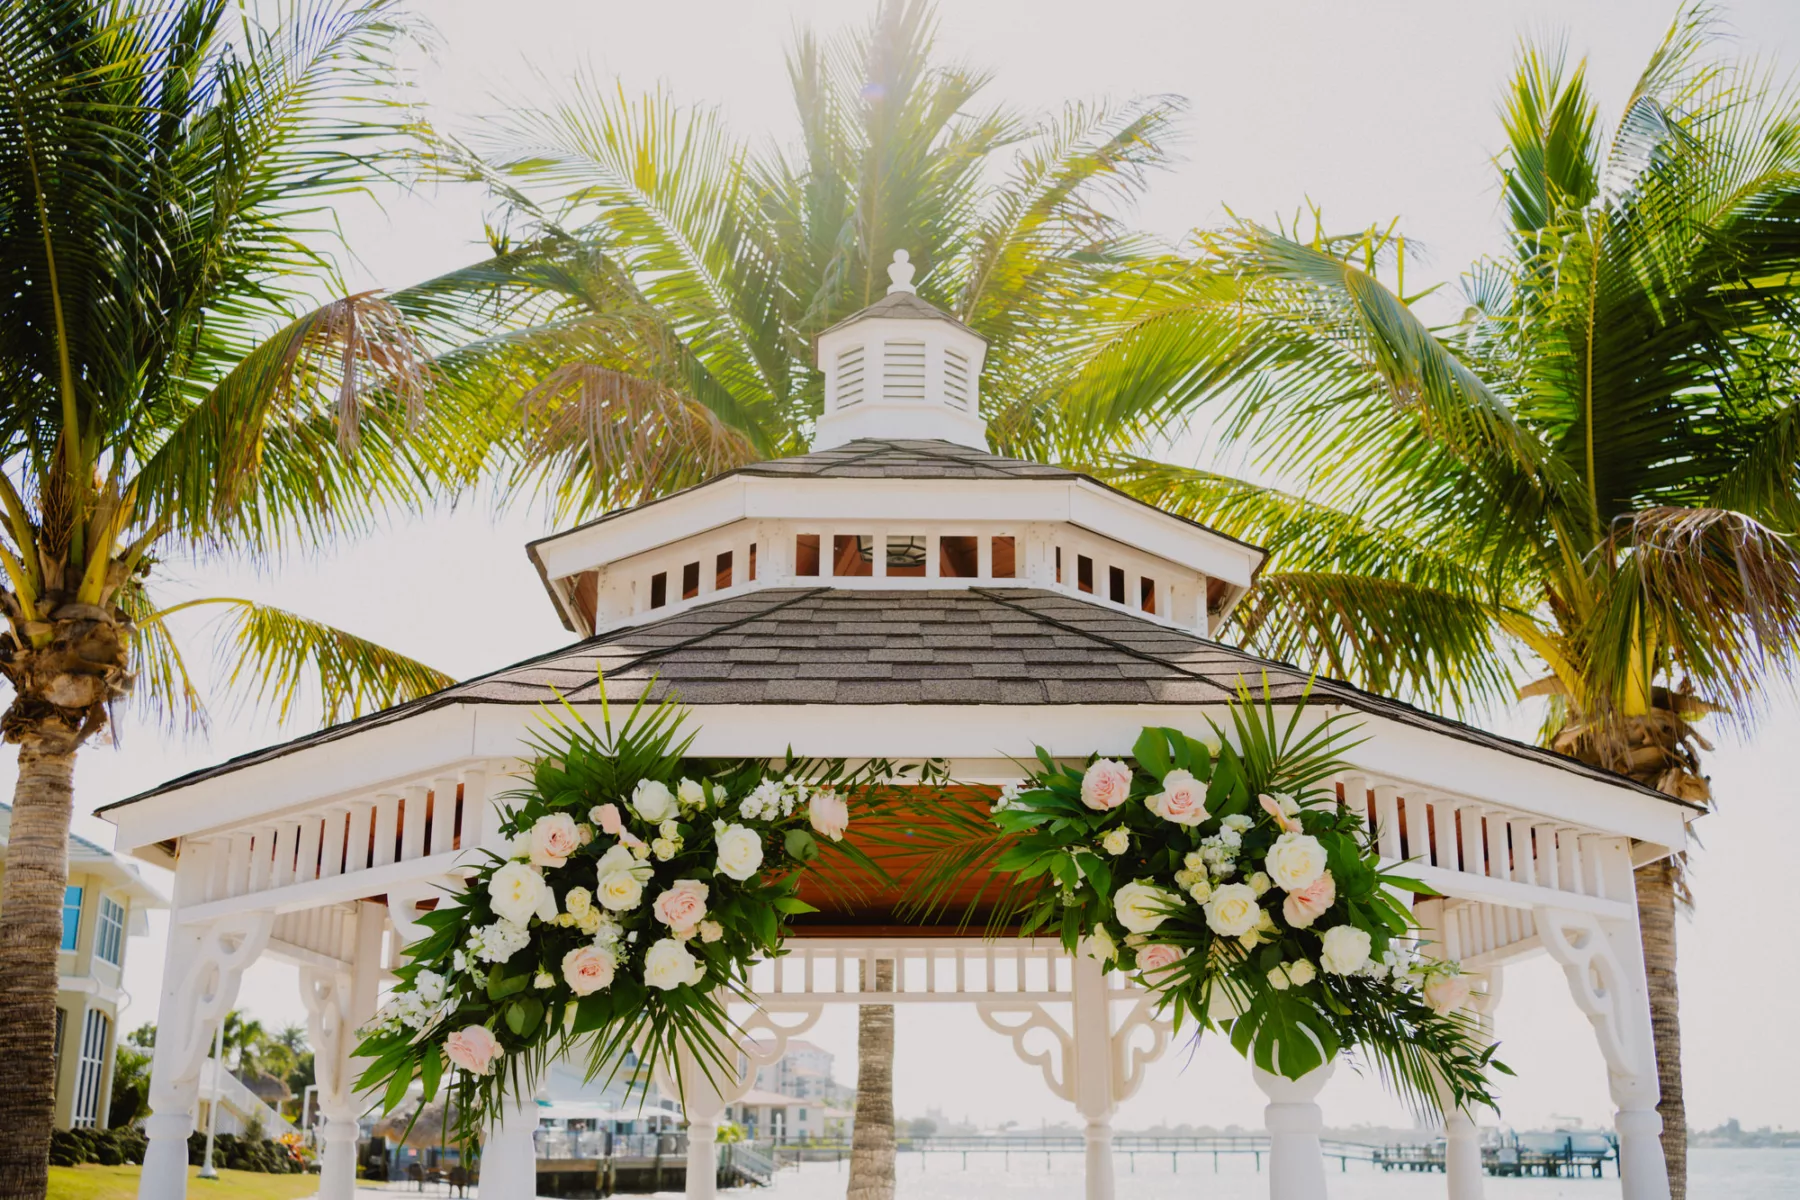 Tropical Pink and White Roses, Monstera, Palm Leaf Gazebo Spring Floral Arrangement Decor Ideas | Tampa Bay Florist Monarch Events and Design